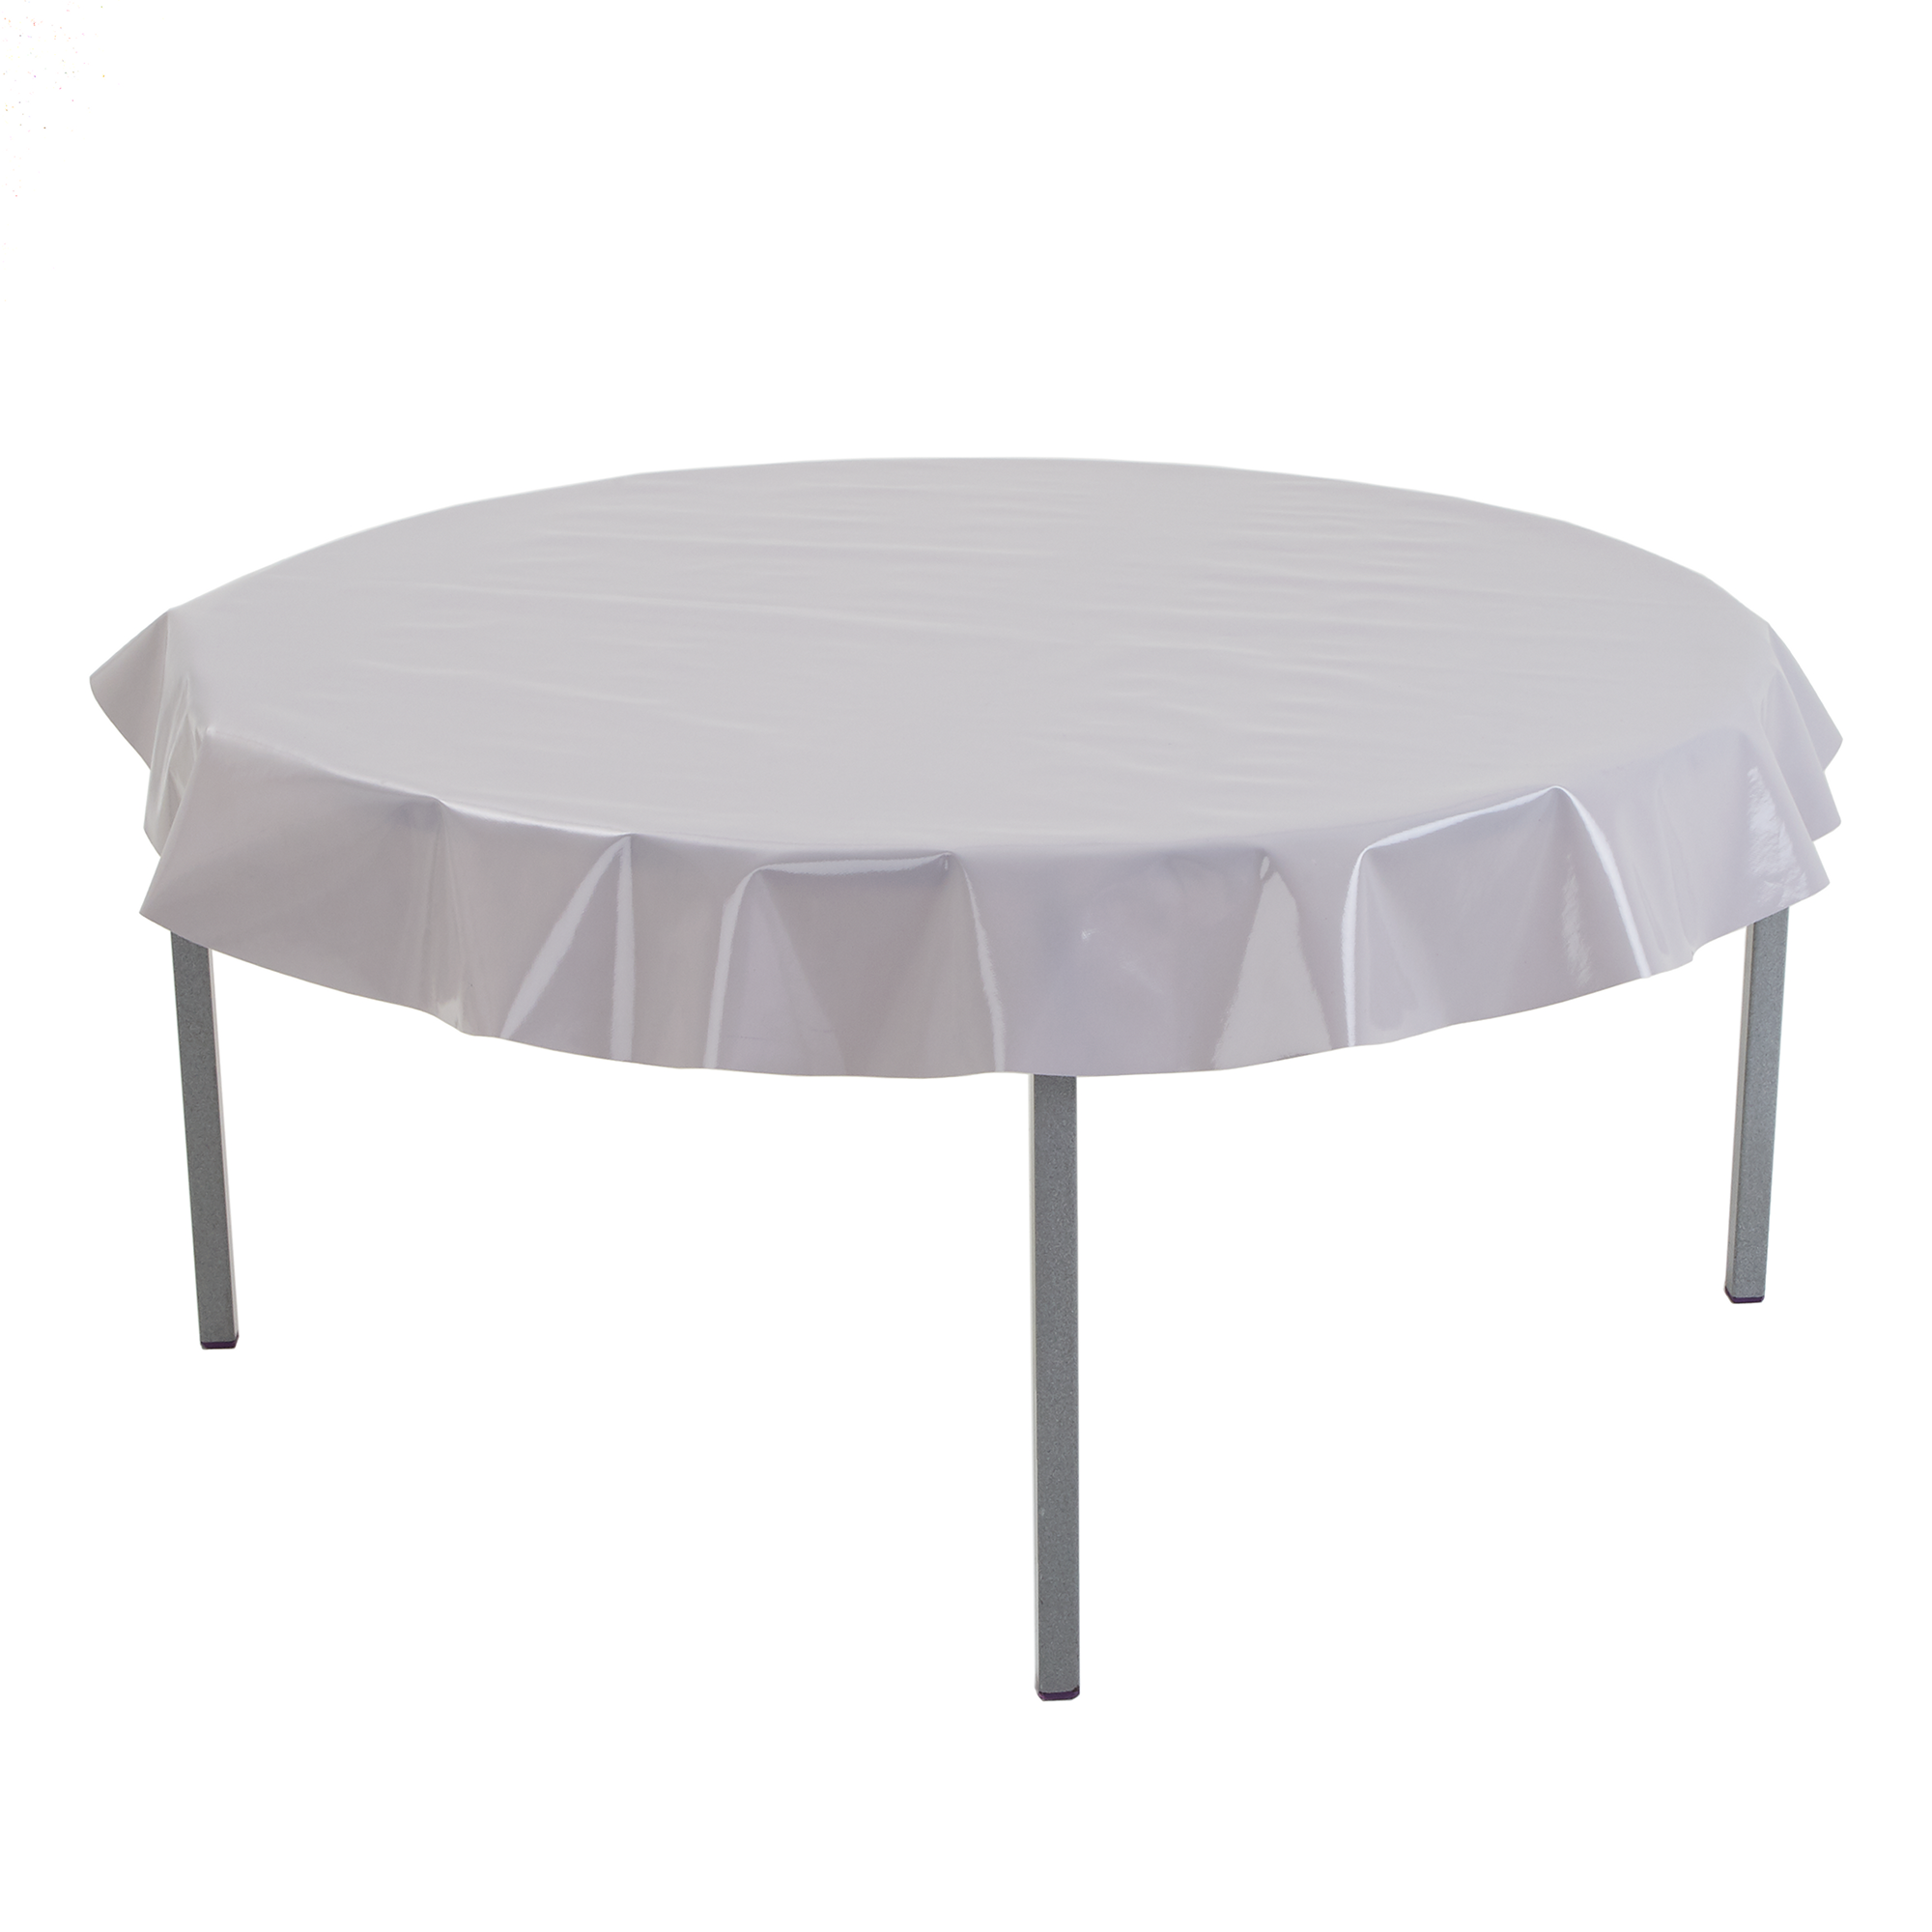 Mats & Table Covers